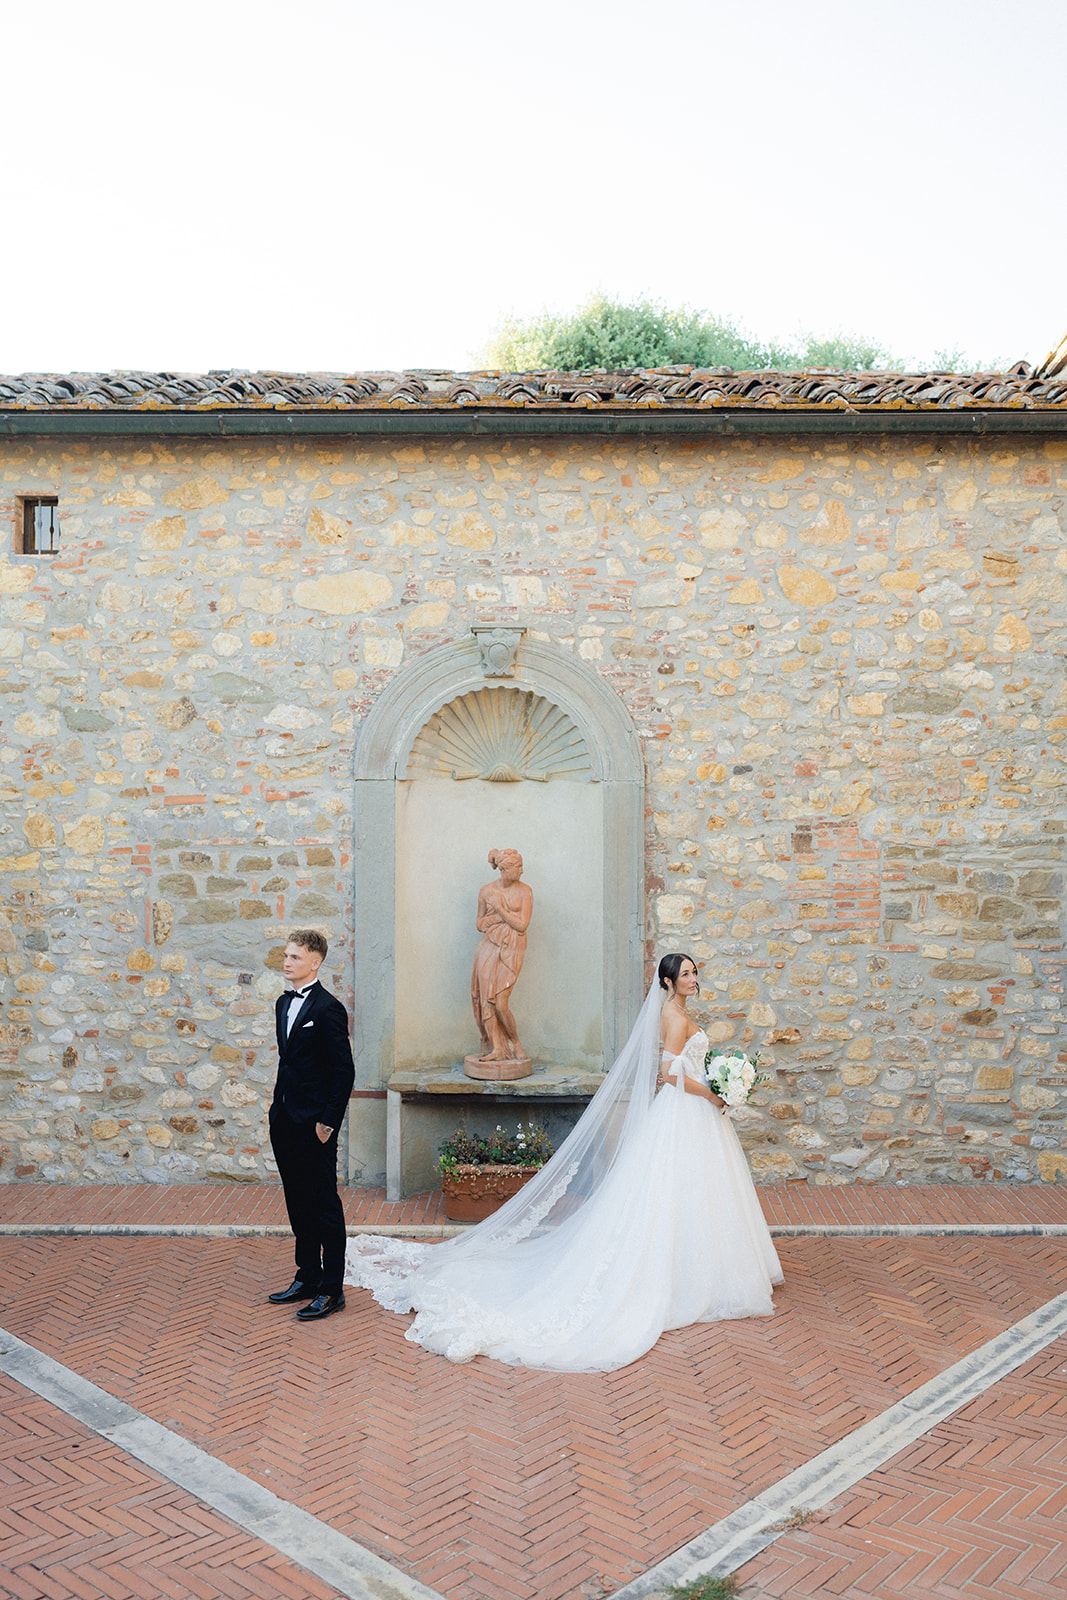 The newlyweds pose next to a statue in the gardens of Villa La Selva